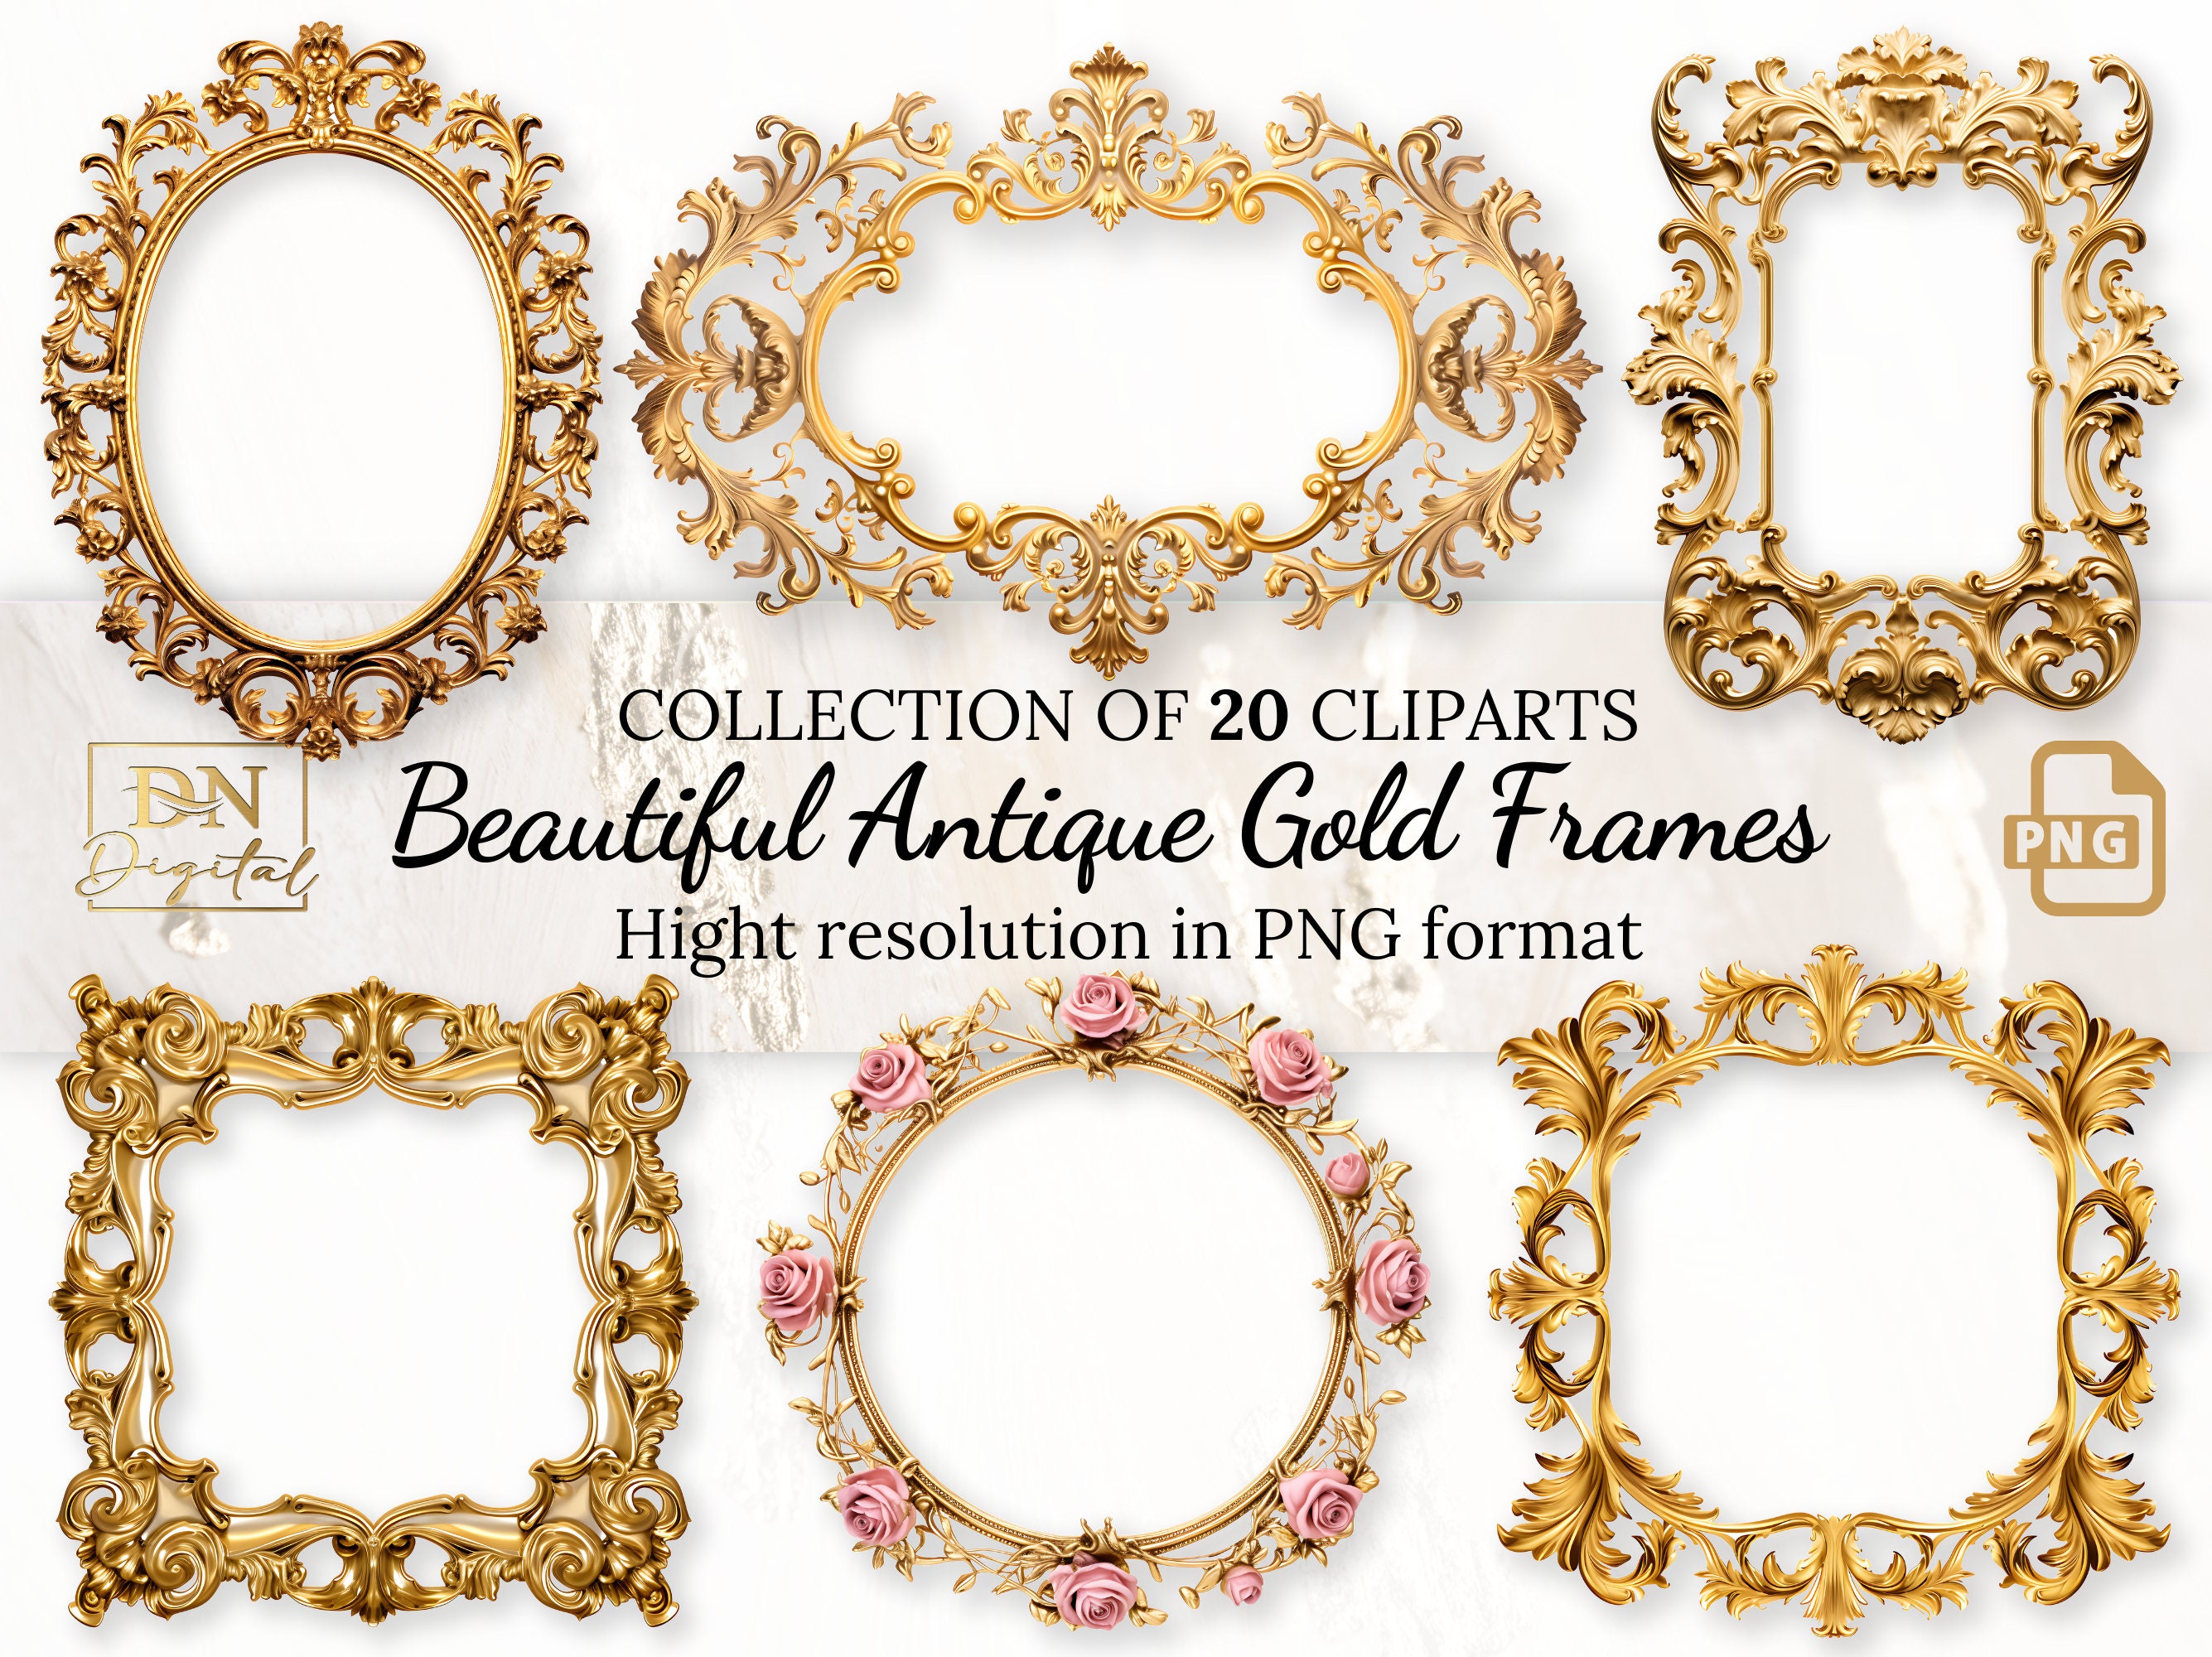 Buy Frame Gallant Gold 40x40 cm here 